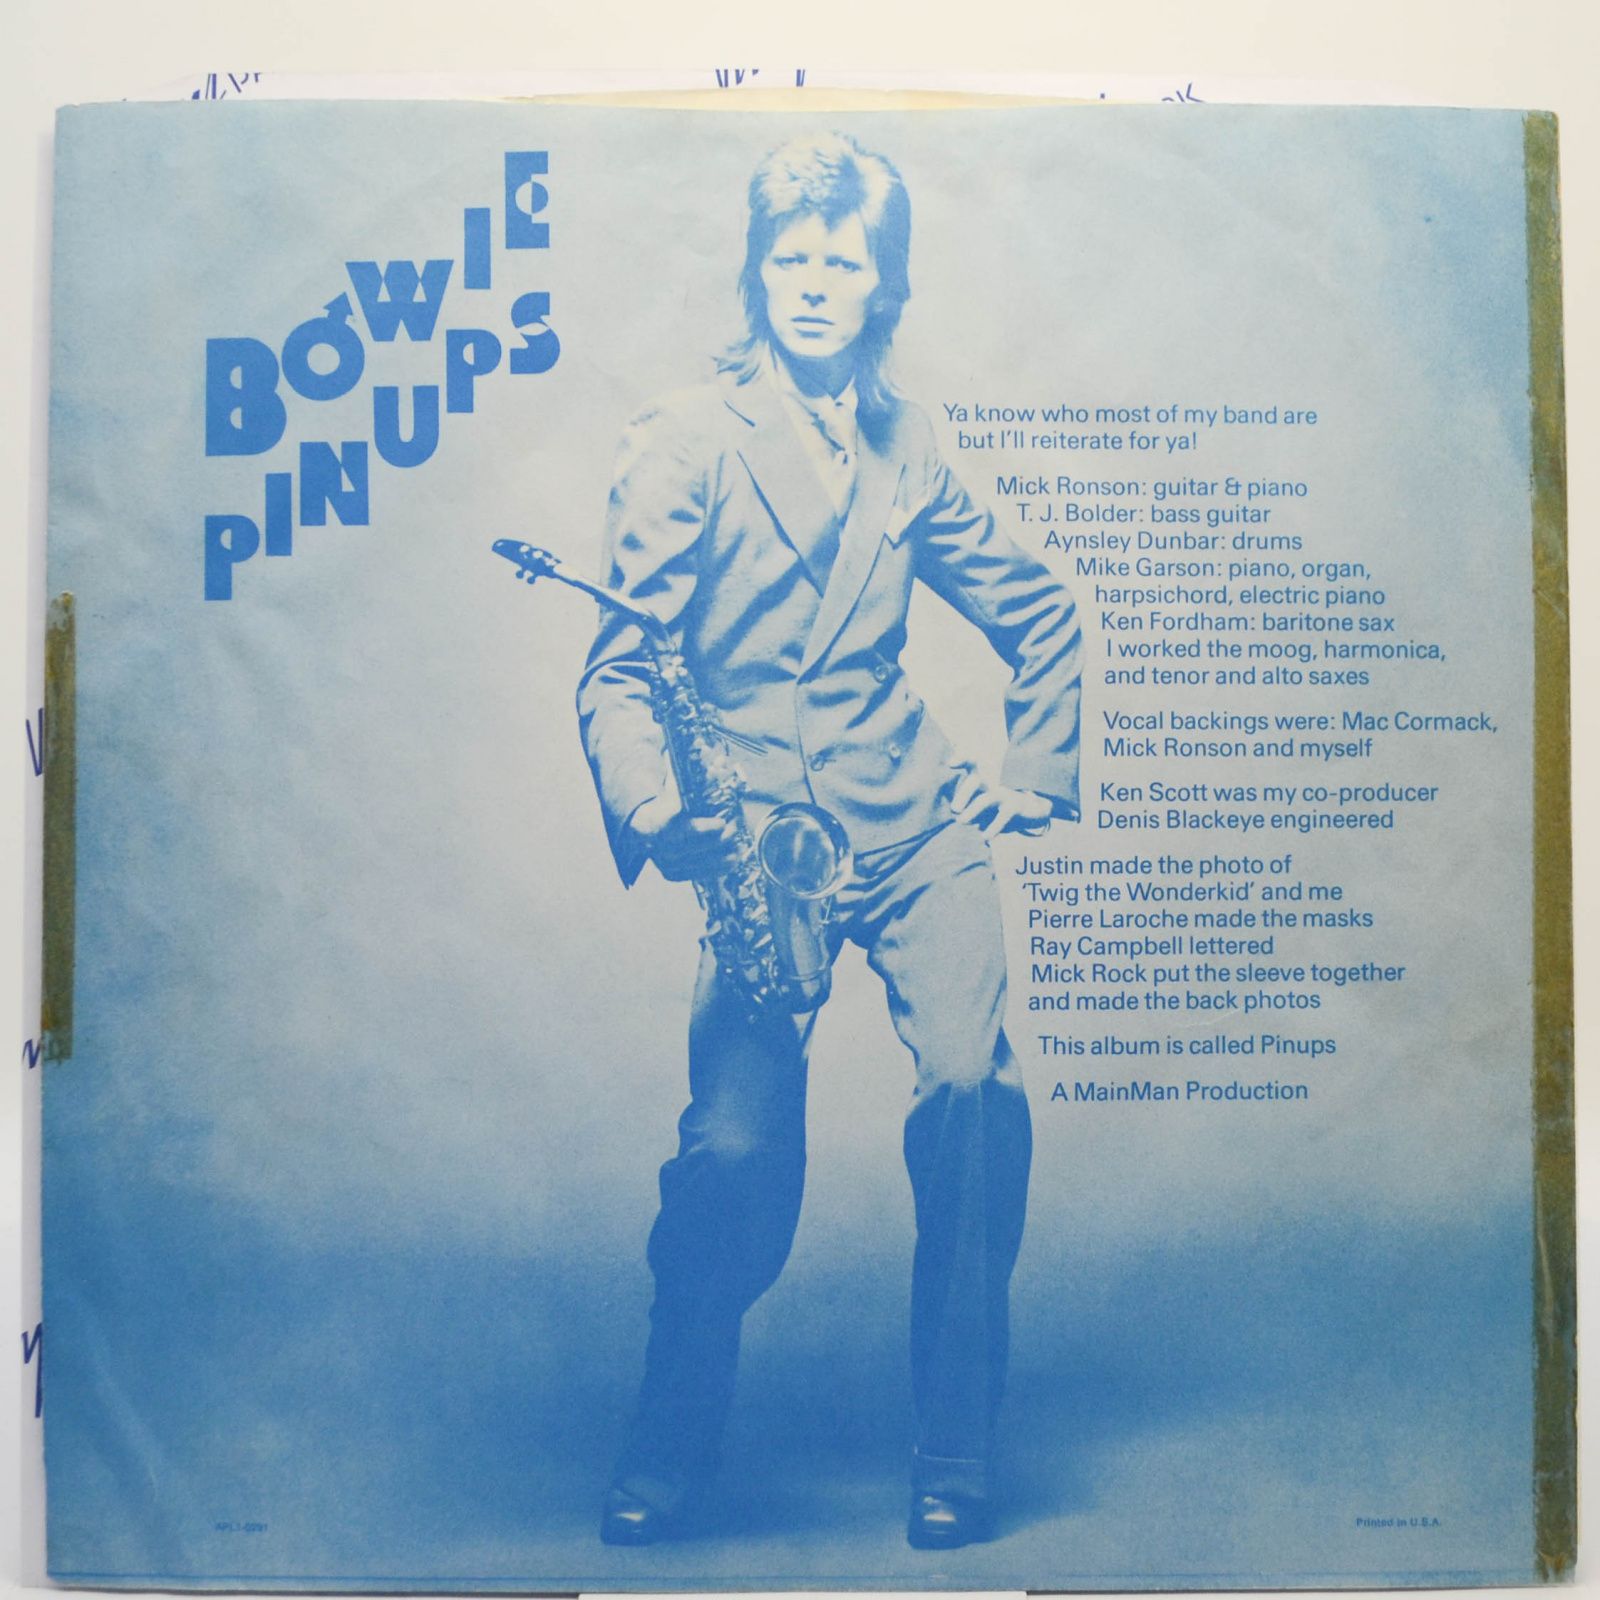 Bowie — Pinups, 1973